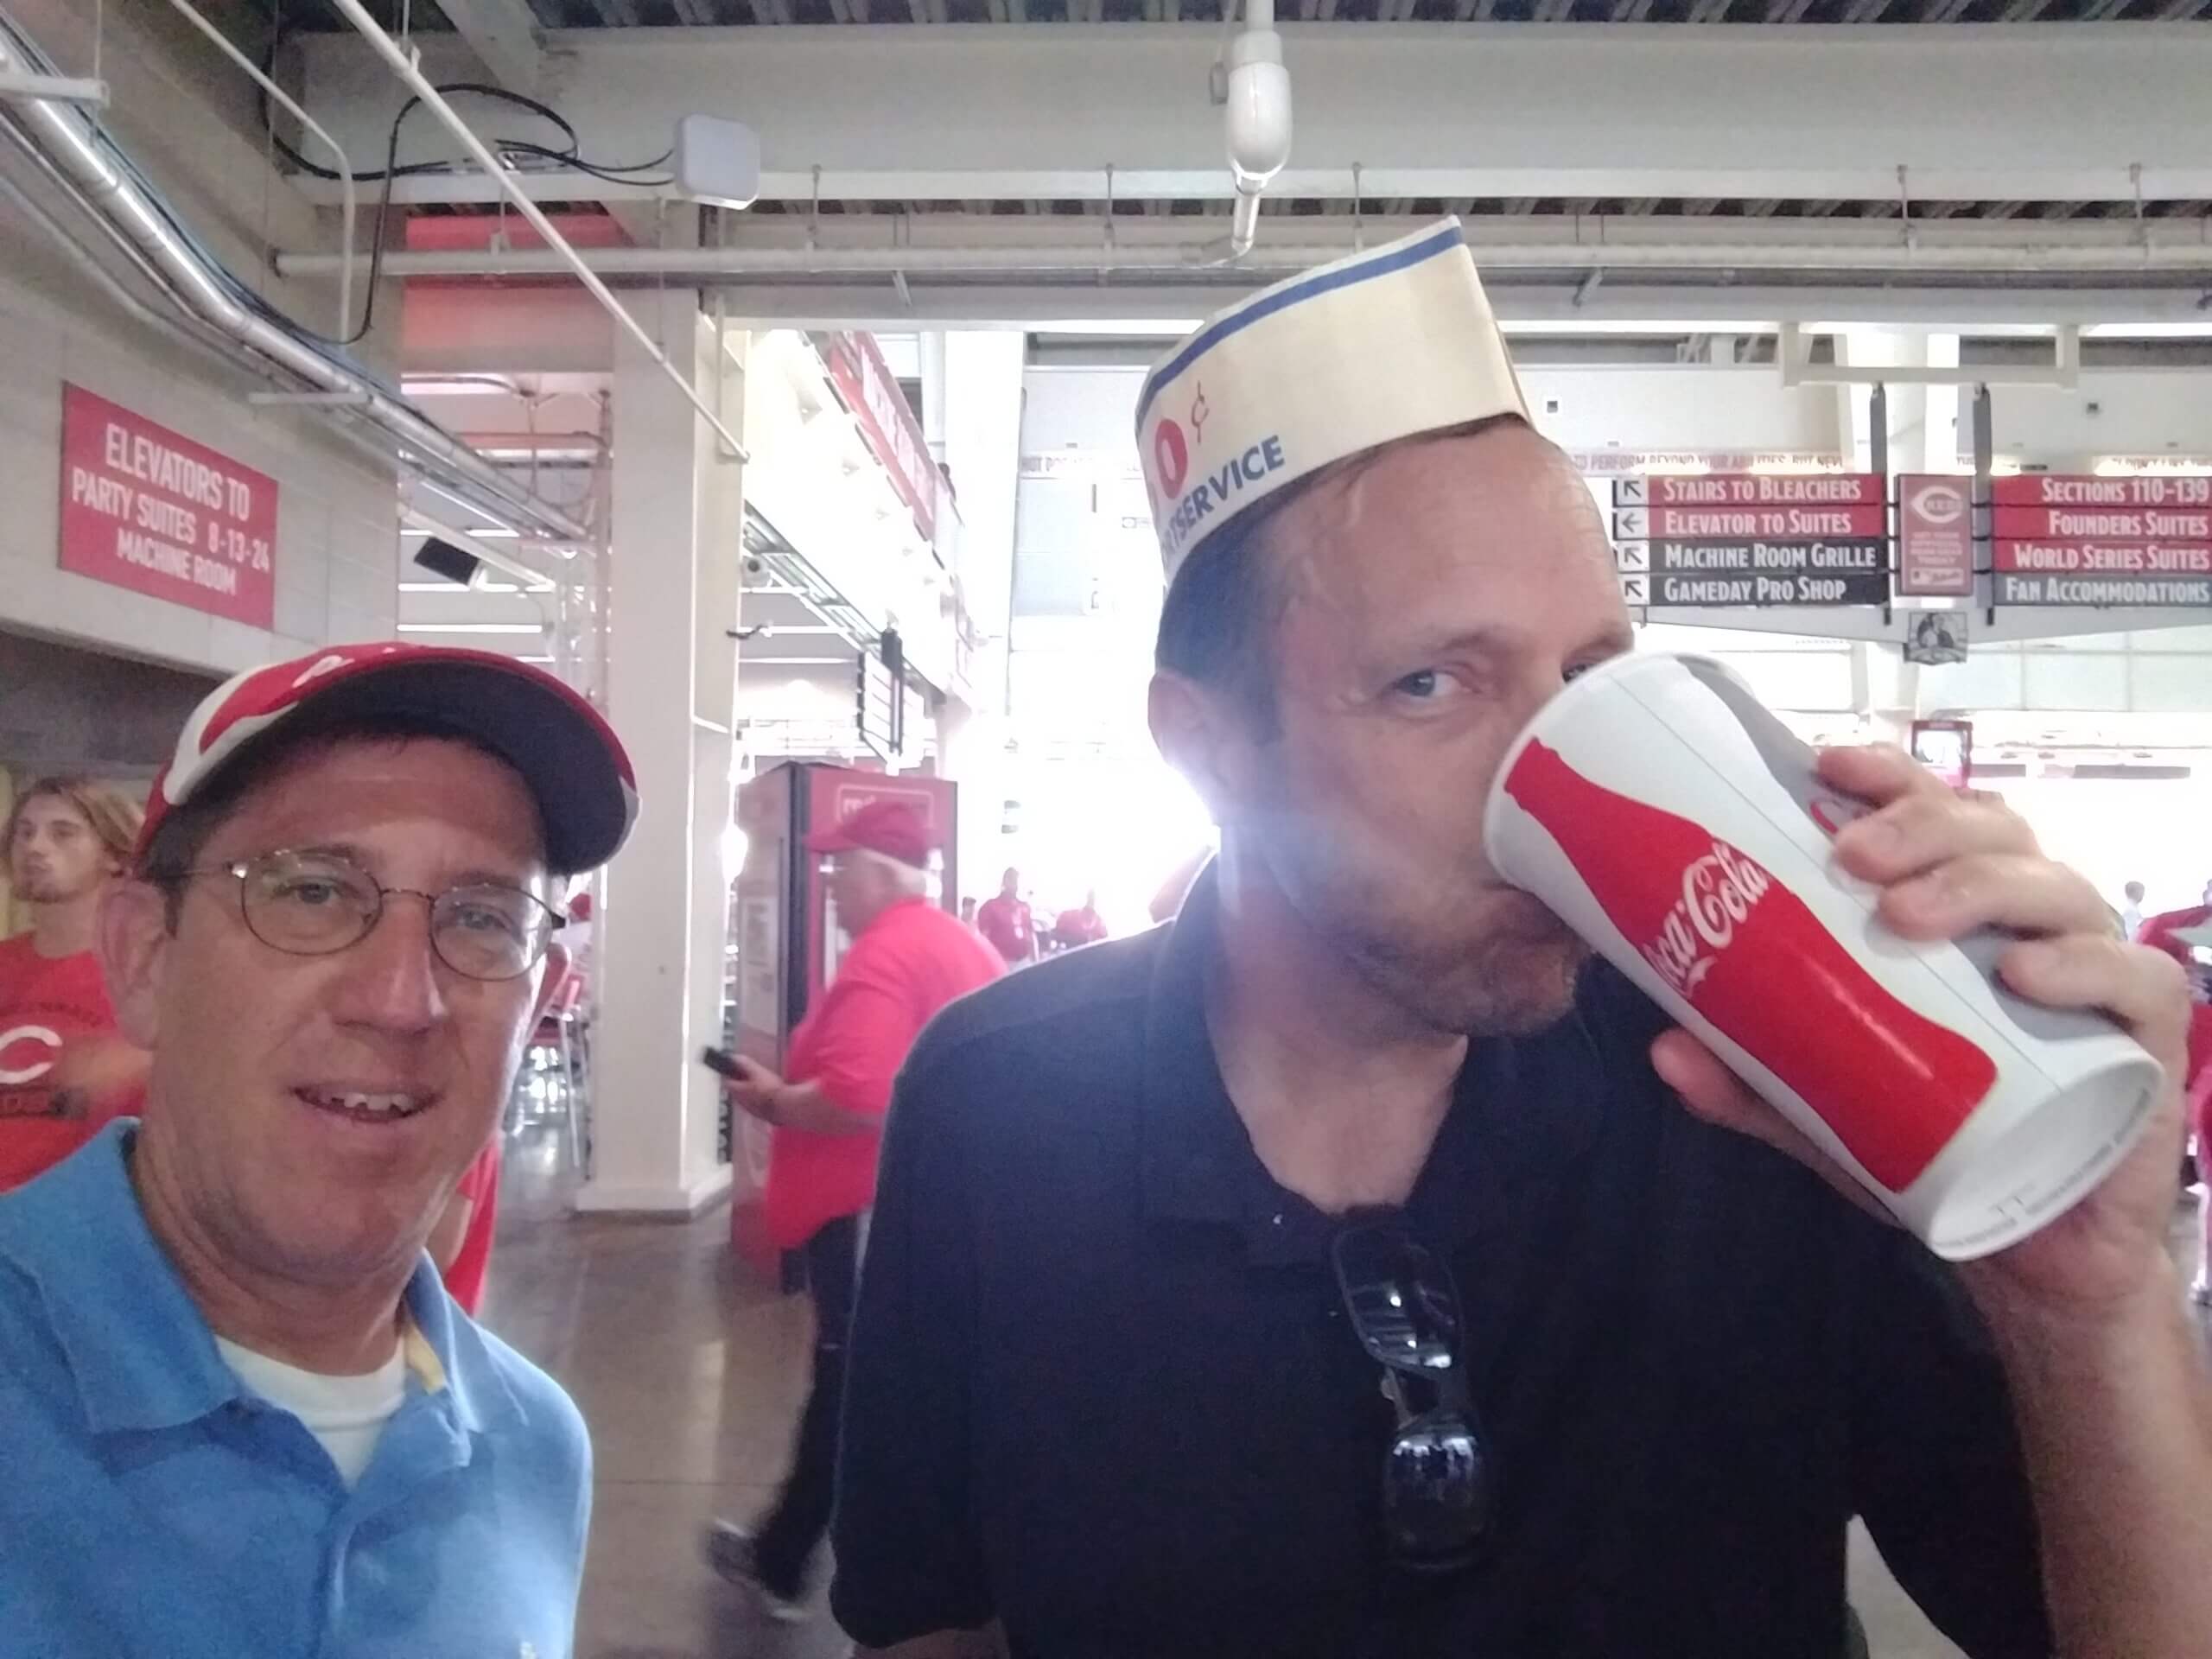 Two enthusiastic baseball fans enjoying a cold Coca Cola for a temporary refreshment.